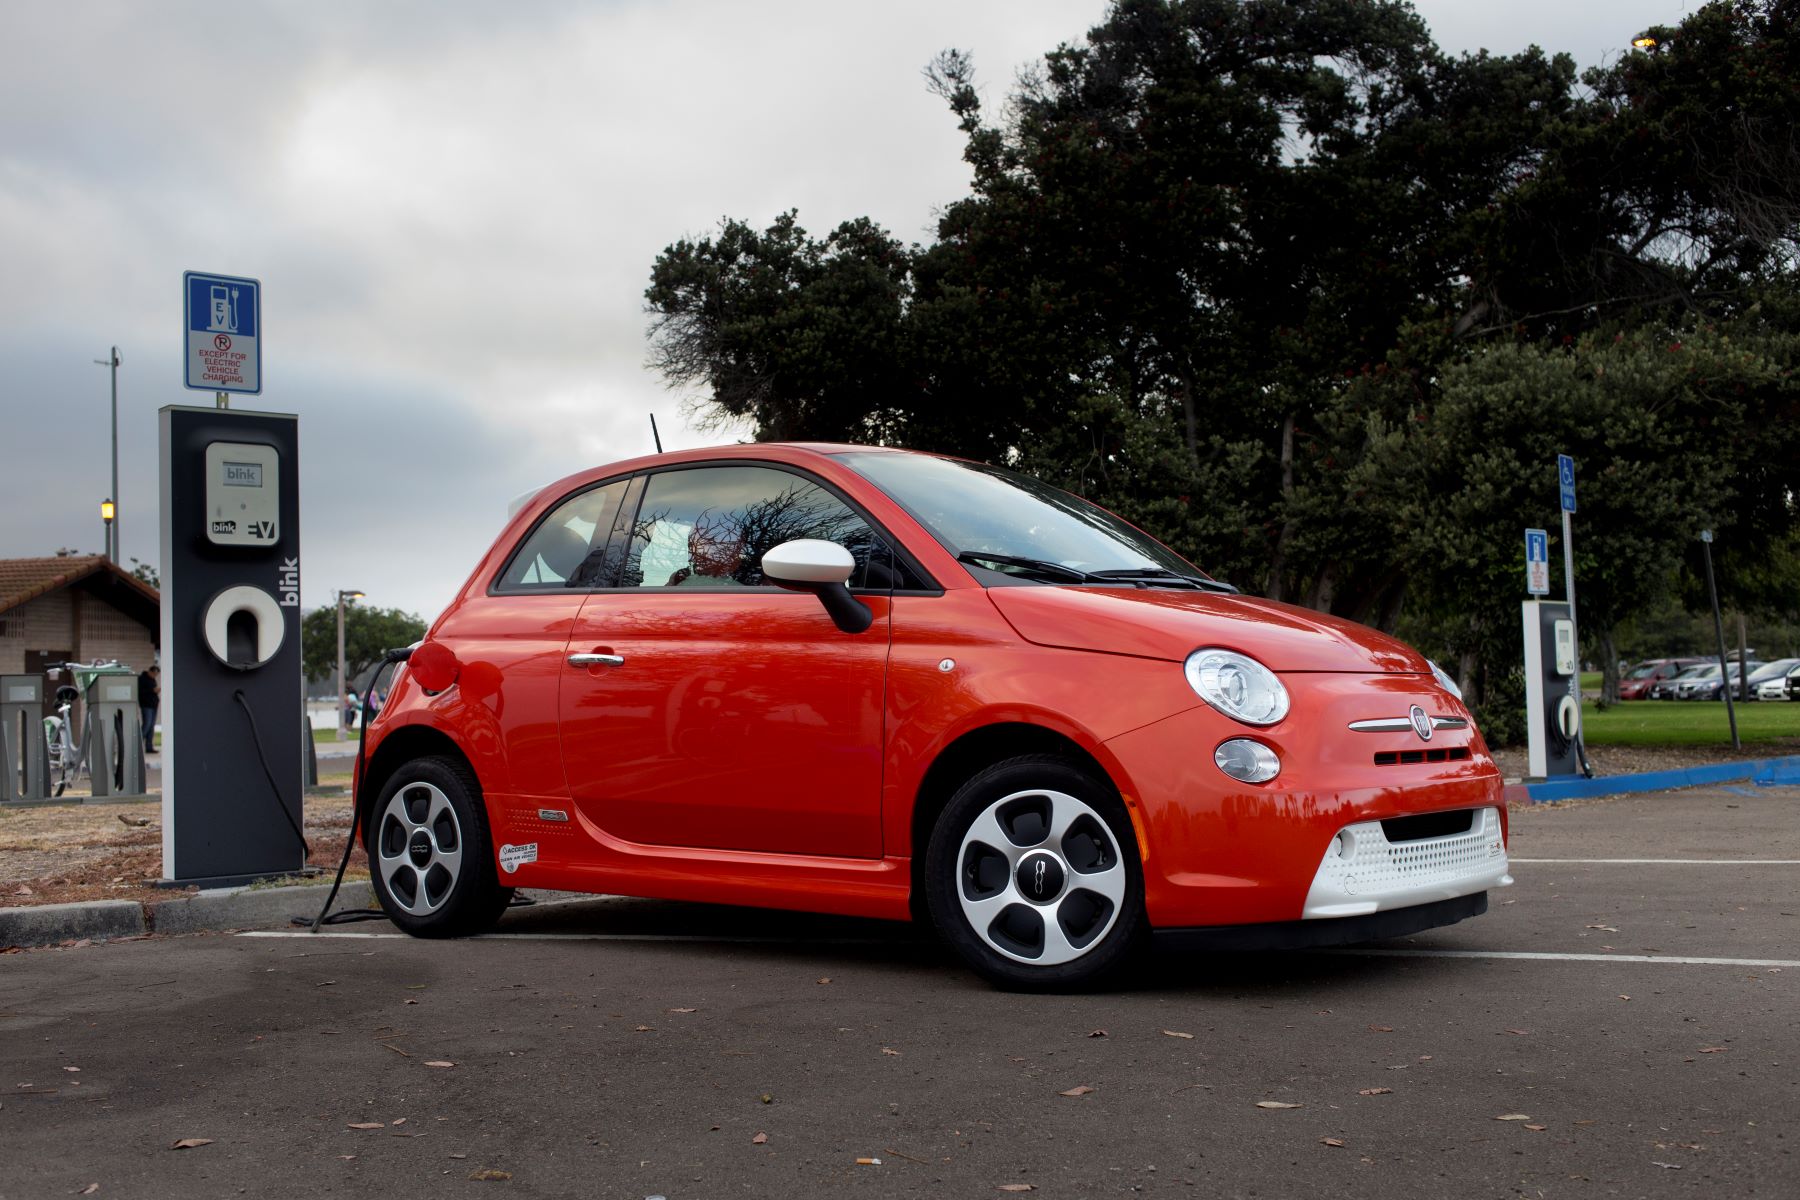 A red Fiat 500e electric vehicle (EV) plugged into a charging station